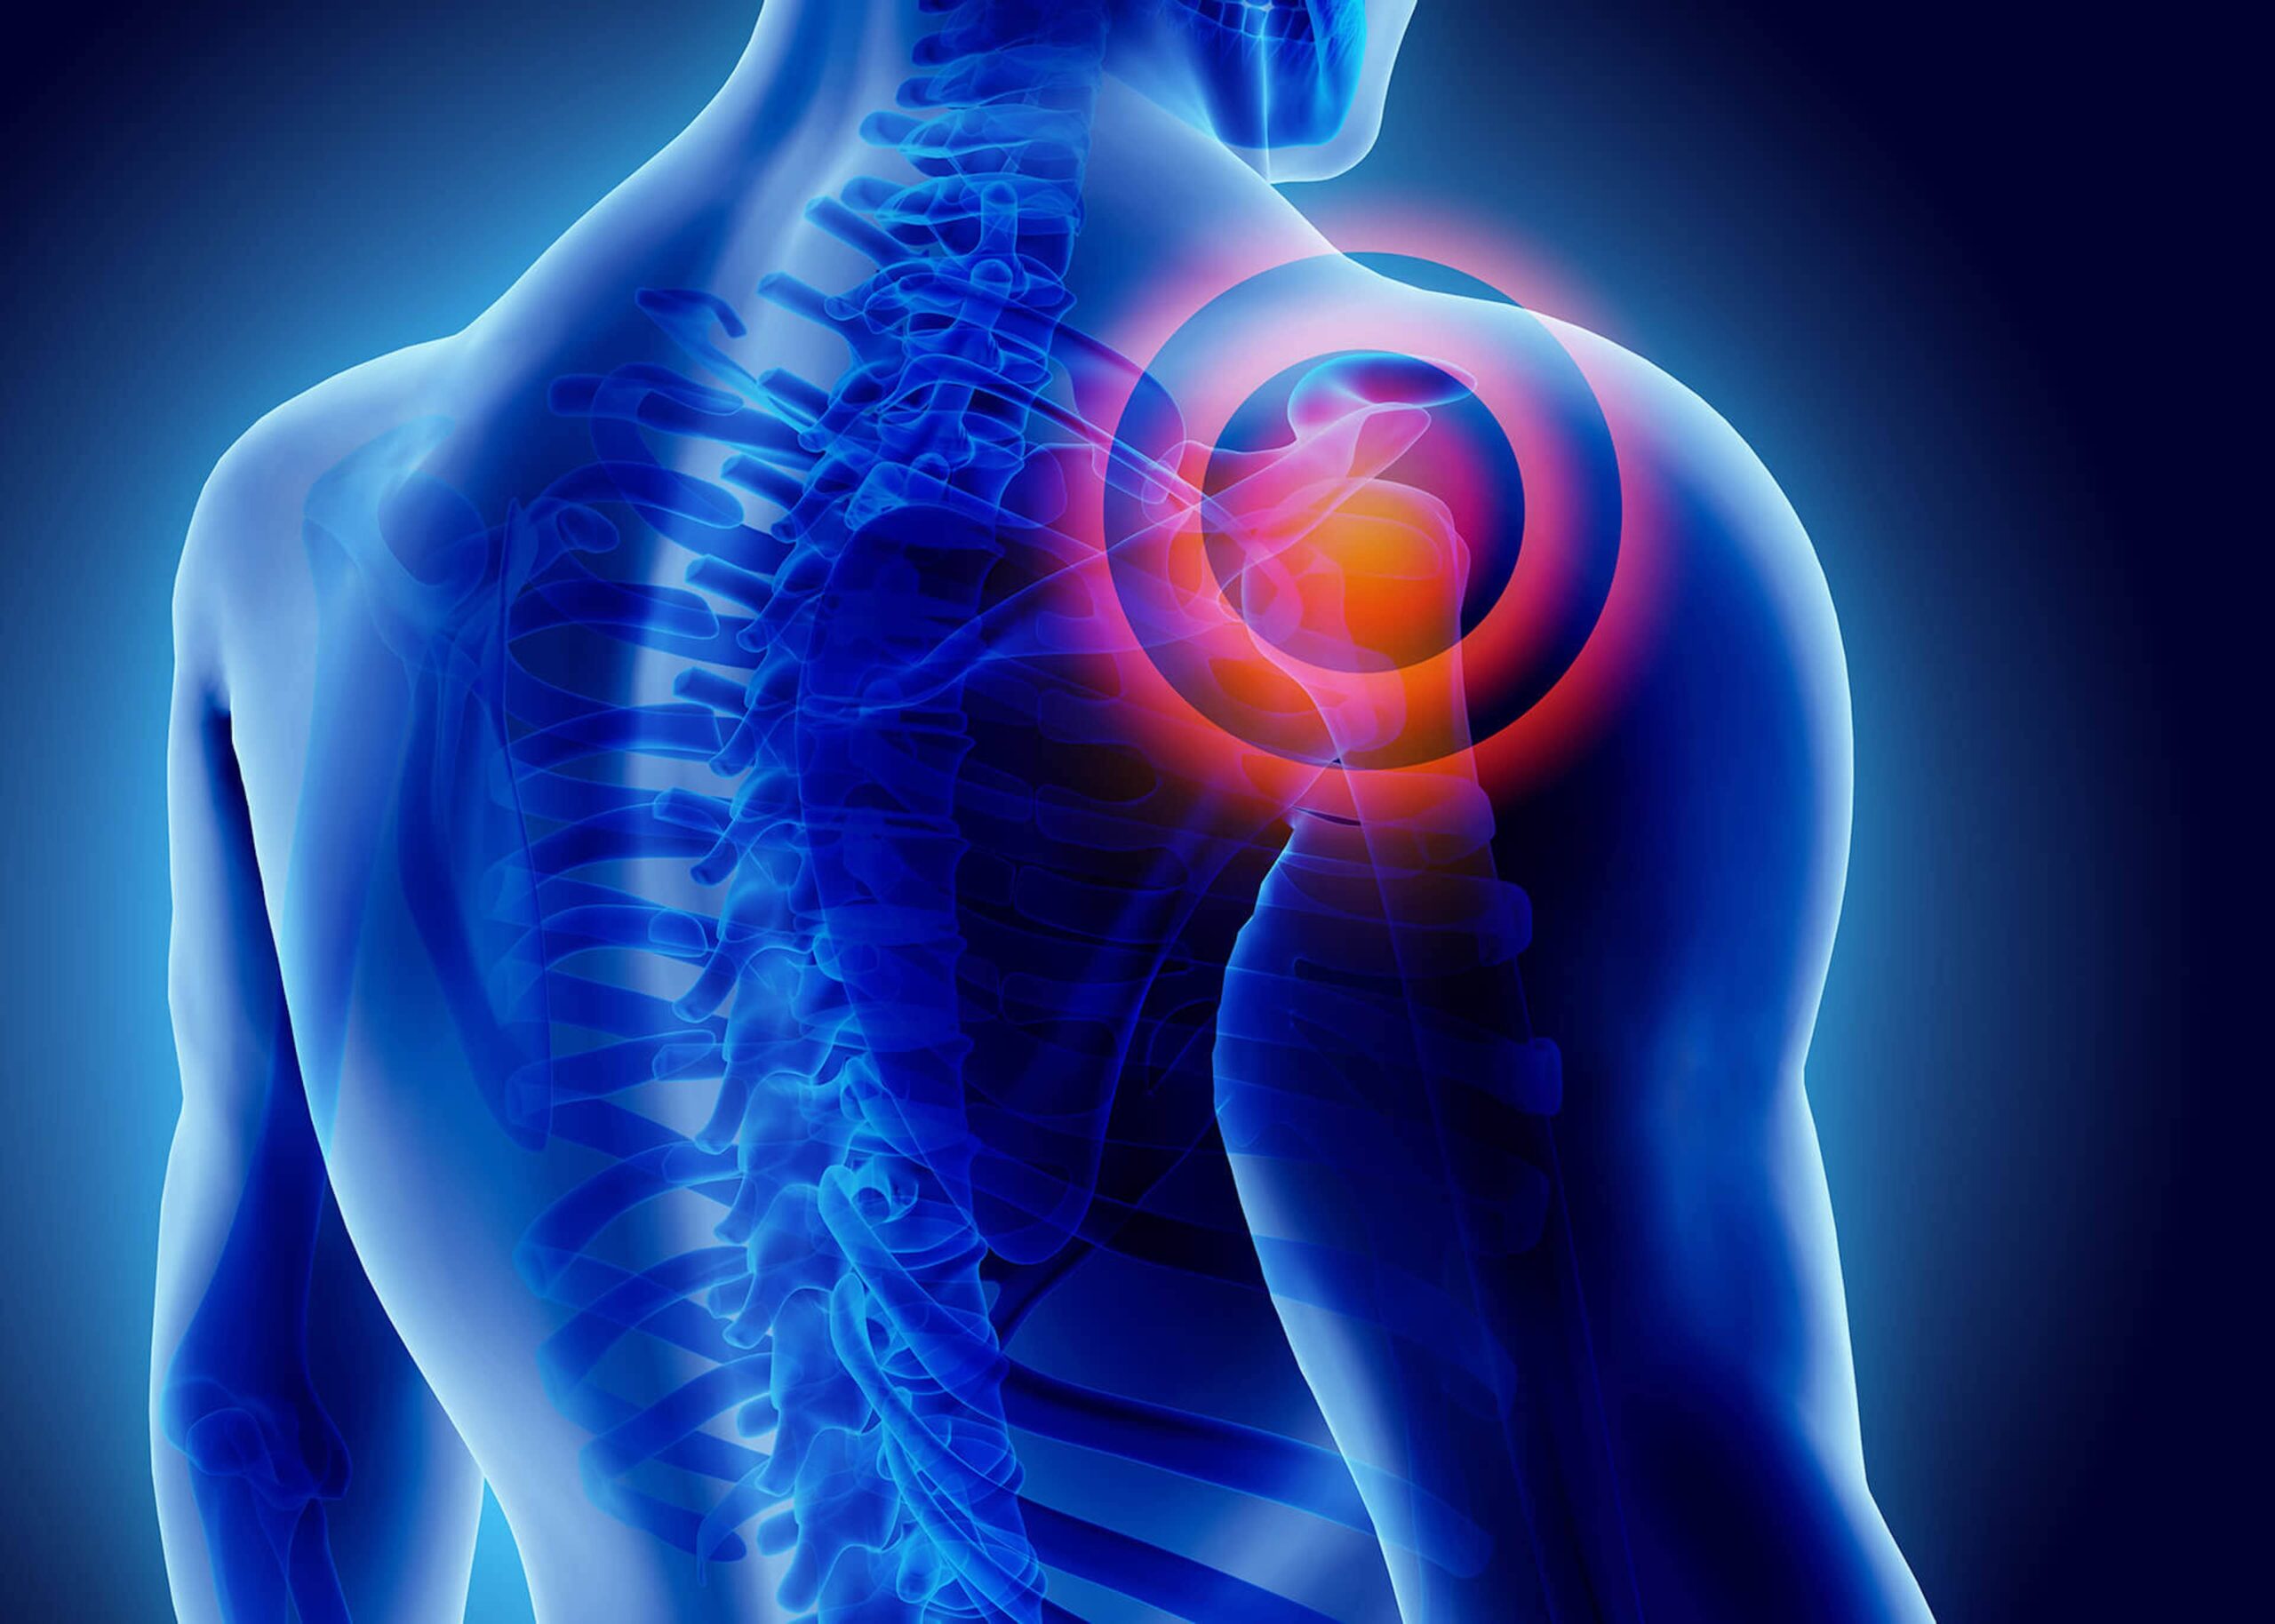 Shoulder dislocation, bicep strain, and more. Come see Dr. Goradia at G2 Orthopedics to treat your shoulder pain. He also provides rotator cuff surgery recovery guides and others to help patients through every stage of treatment and recovery.